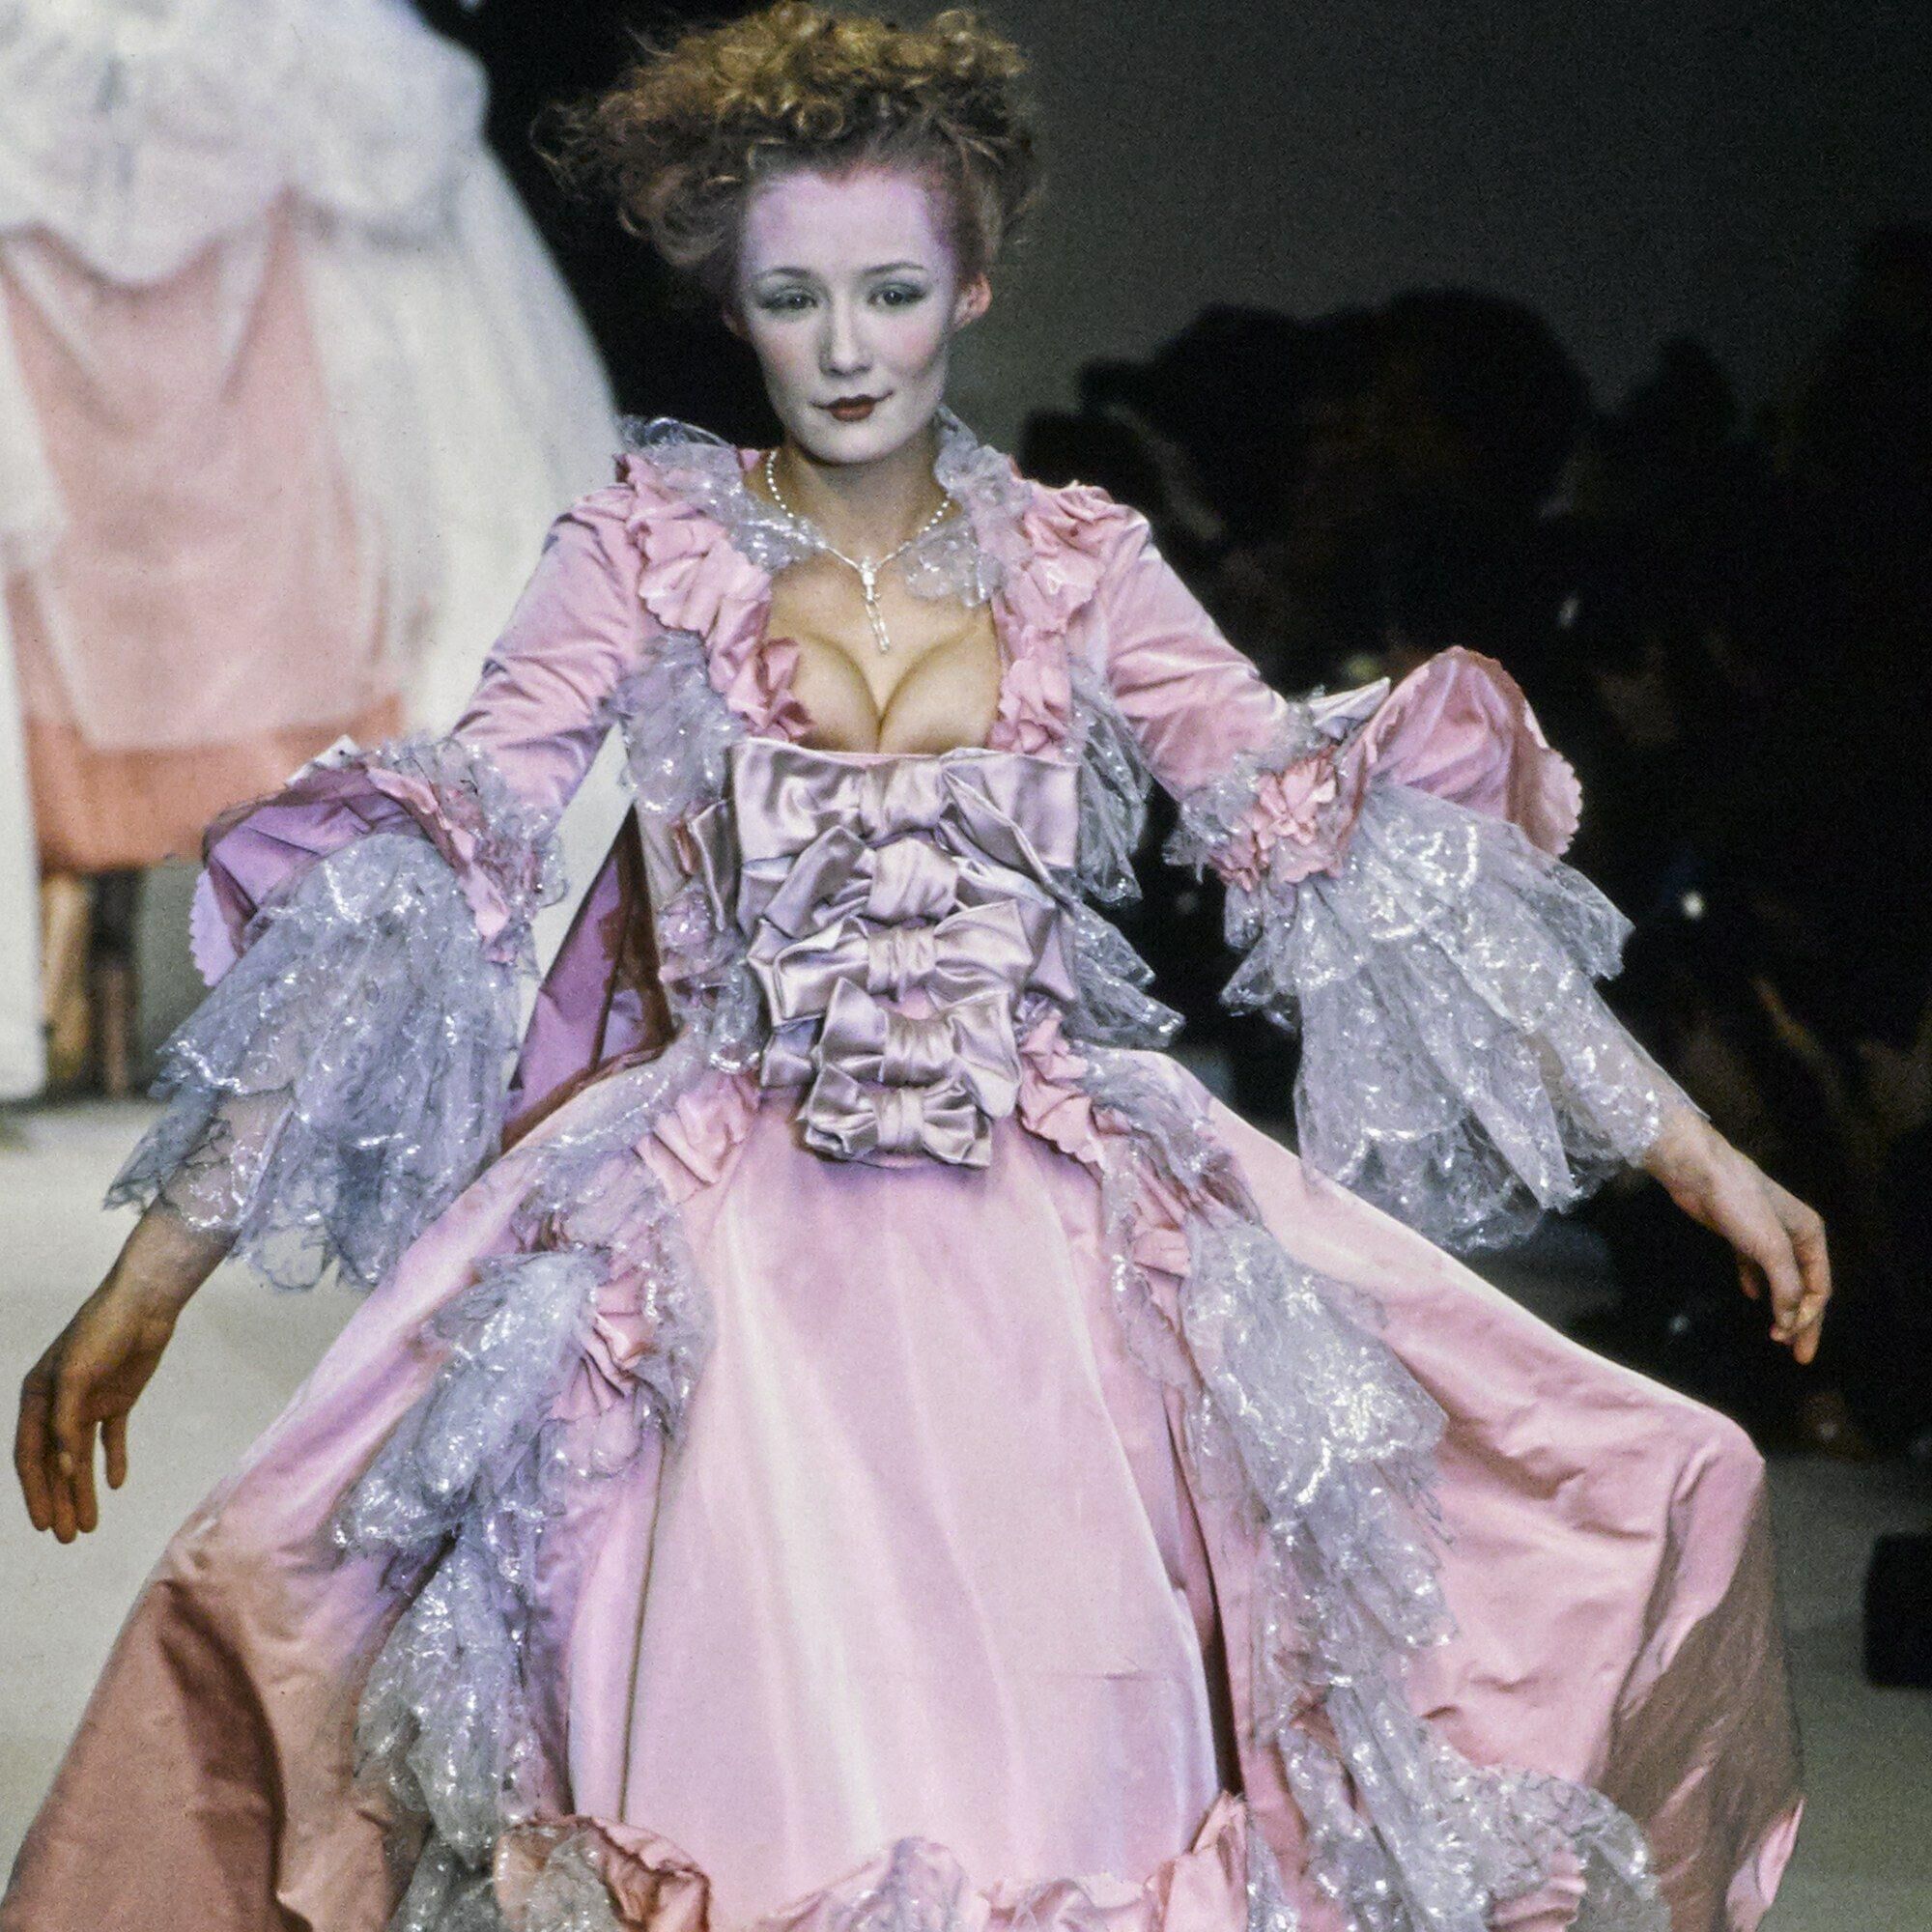 Andreas Kronthaler for Vivienne Westwood Fall 1995 Ready-to-Wear collection_edited